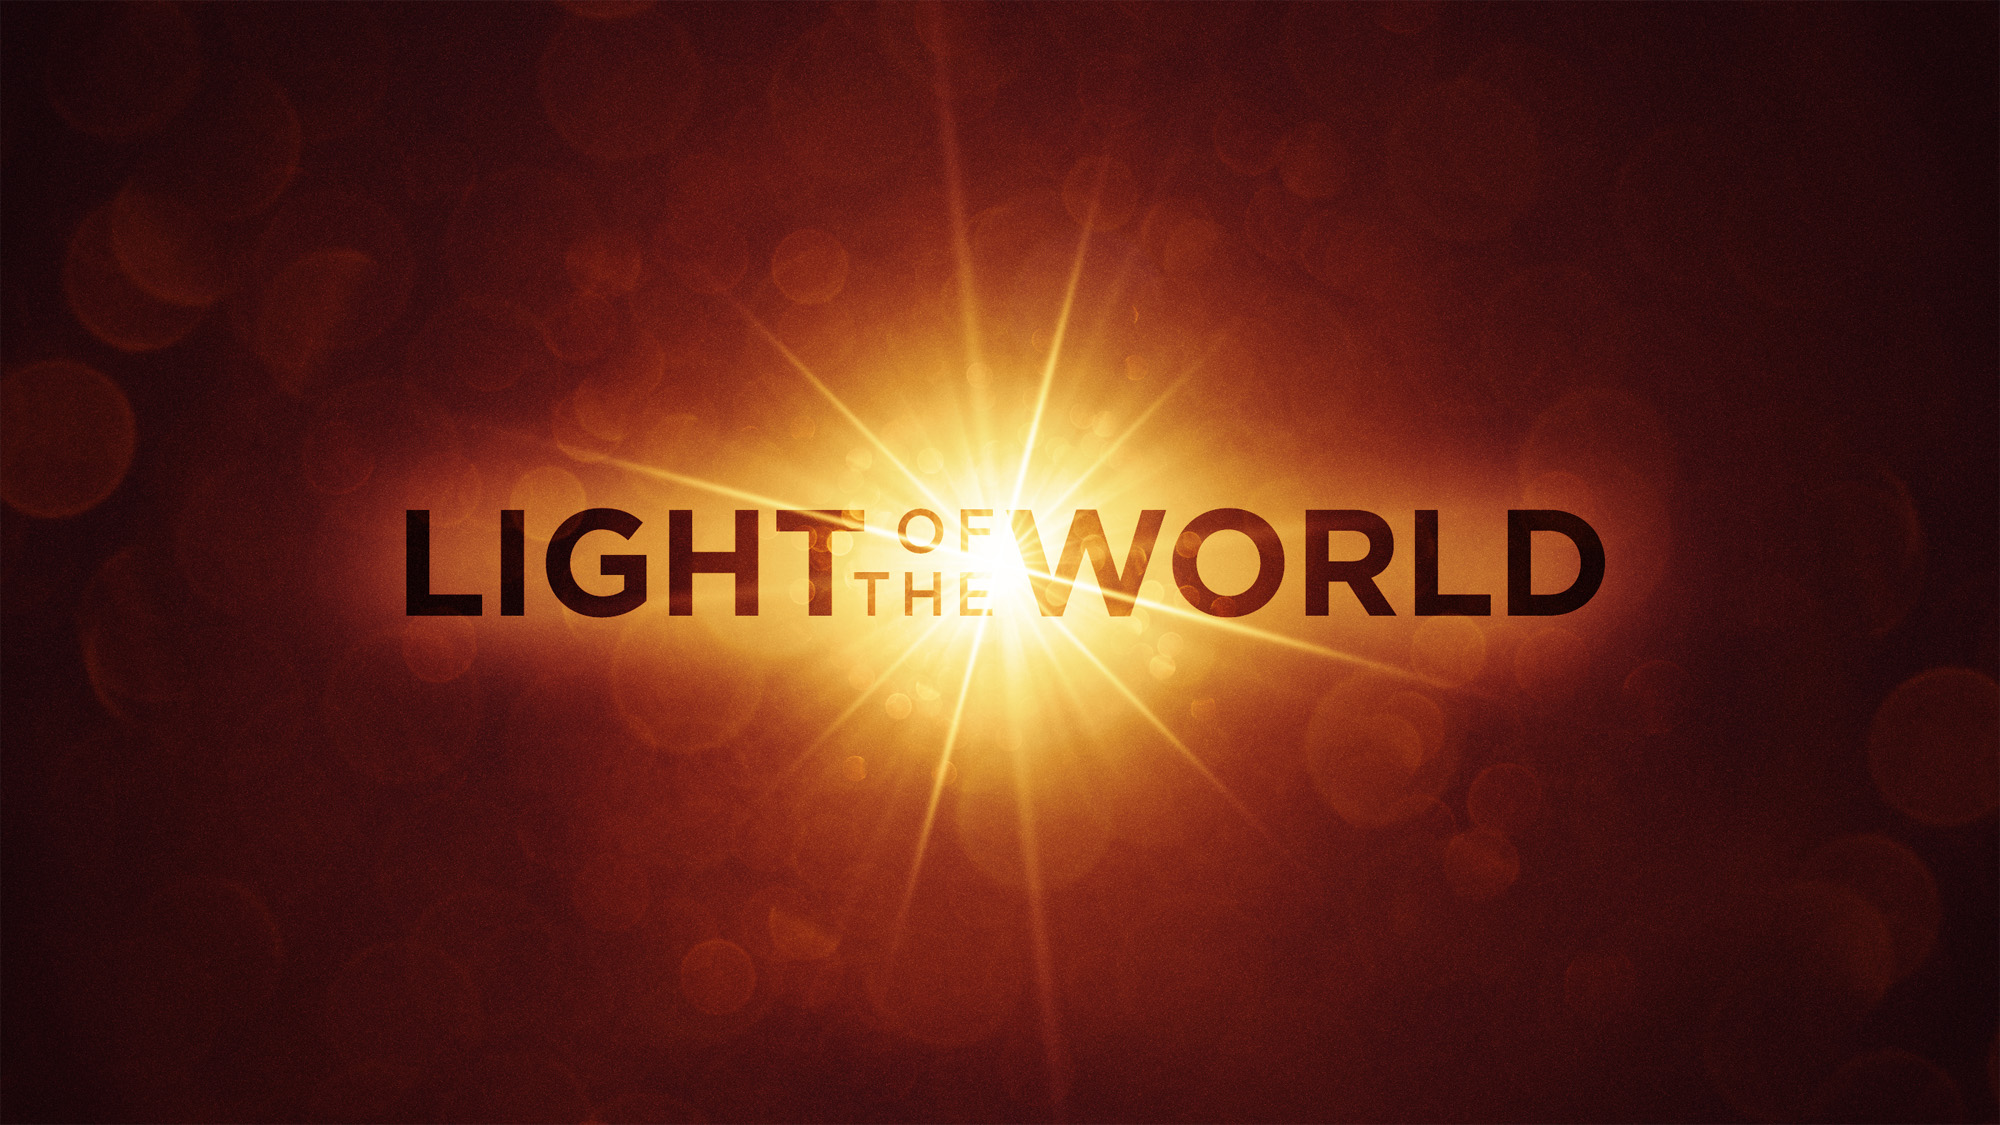 #MotivationalMonday with Pastor Gordon "Ep. 2 The Light Of The World Part 2